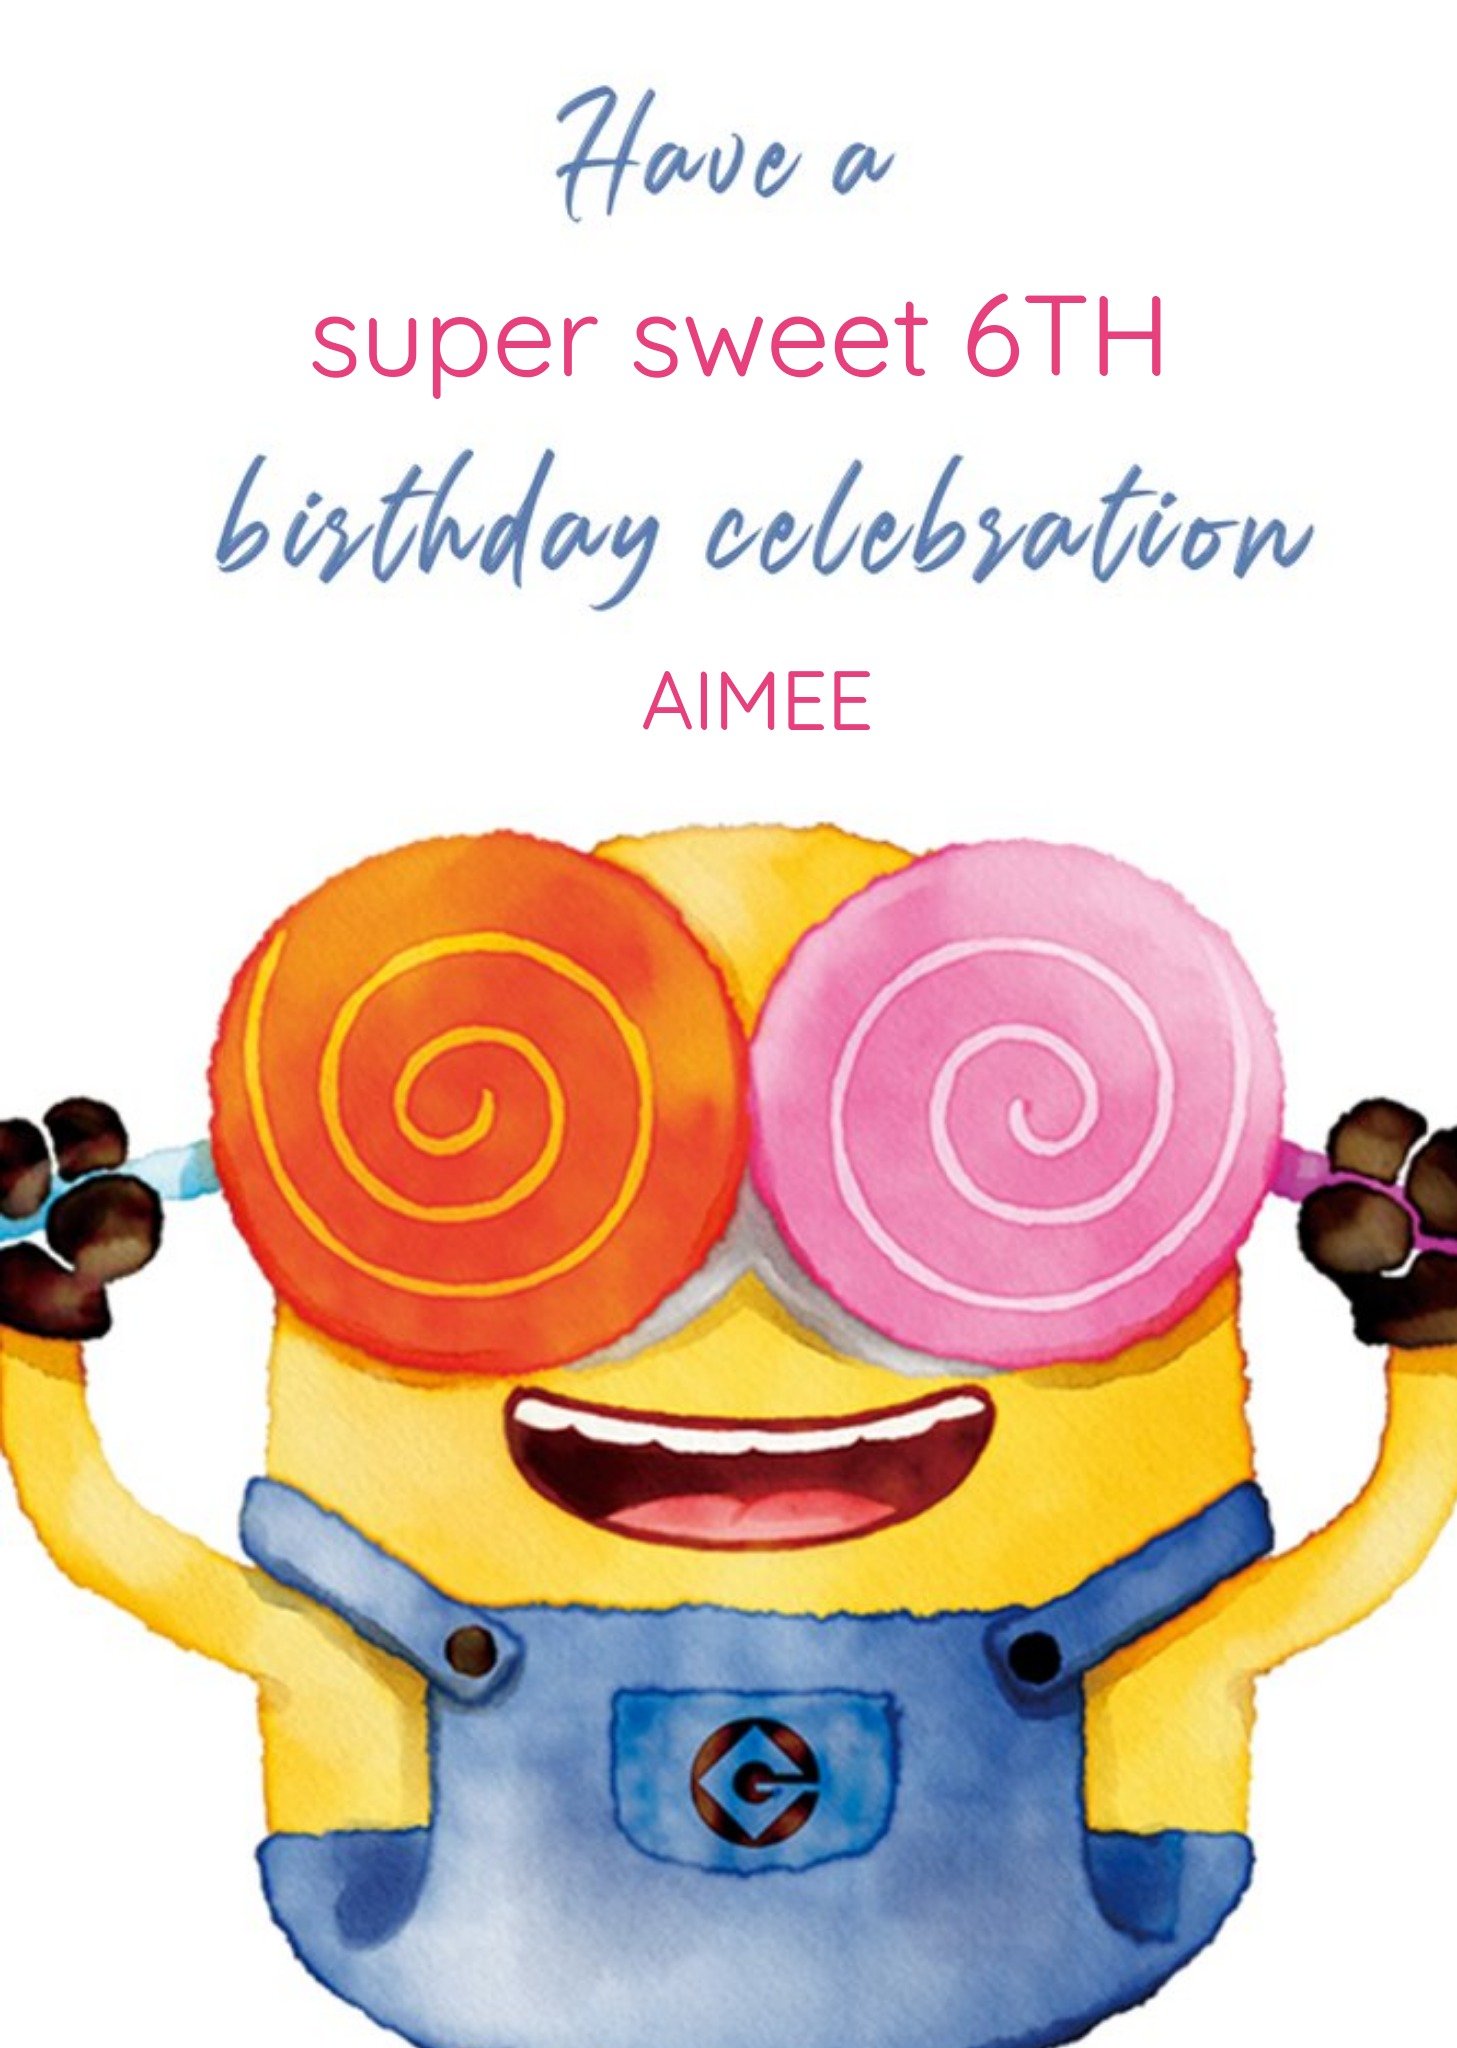 Despicable Me Minions Super Sweet 6th Birthday Card, Large